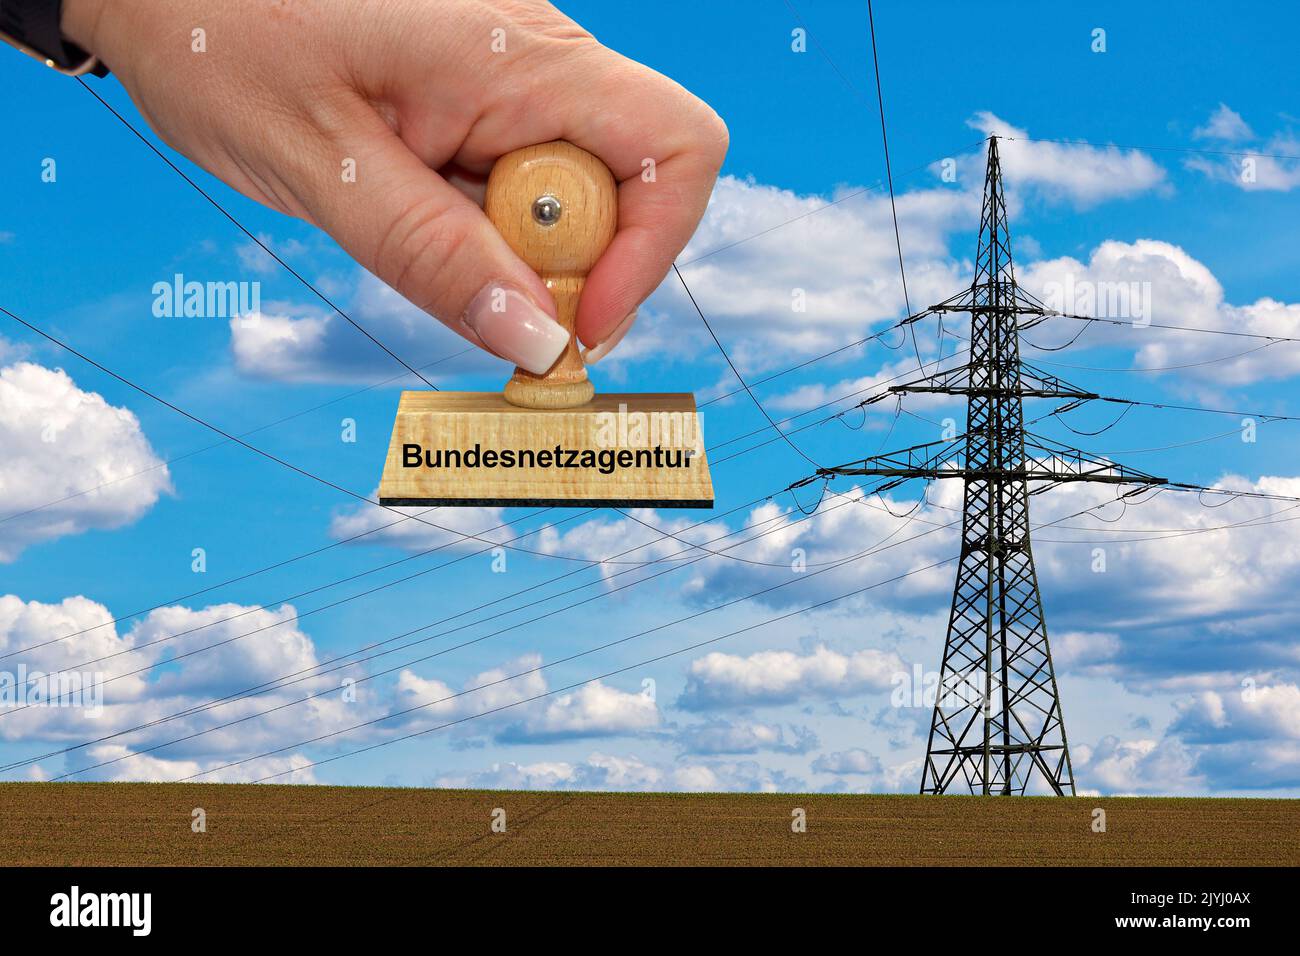 hand with stamp ketteriung Bundesnetzagentur, Federal Network Agency, FNA, power pole in the background, Germany Stock Photo